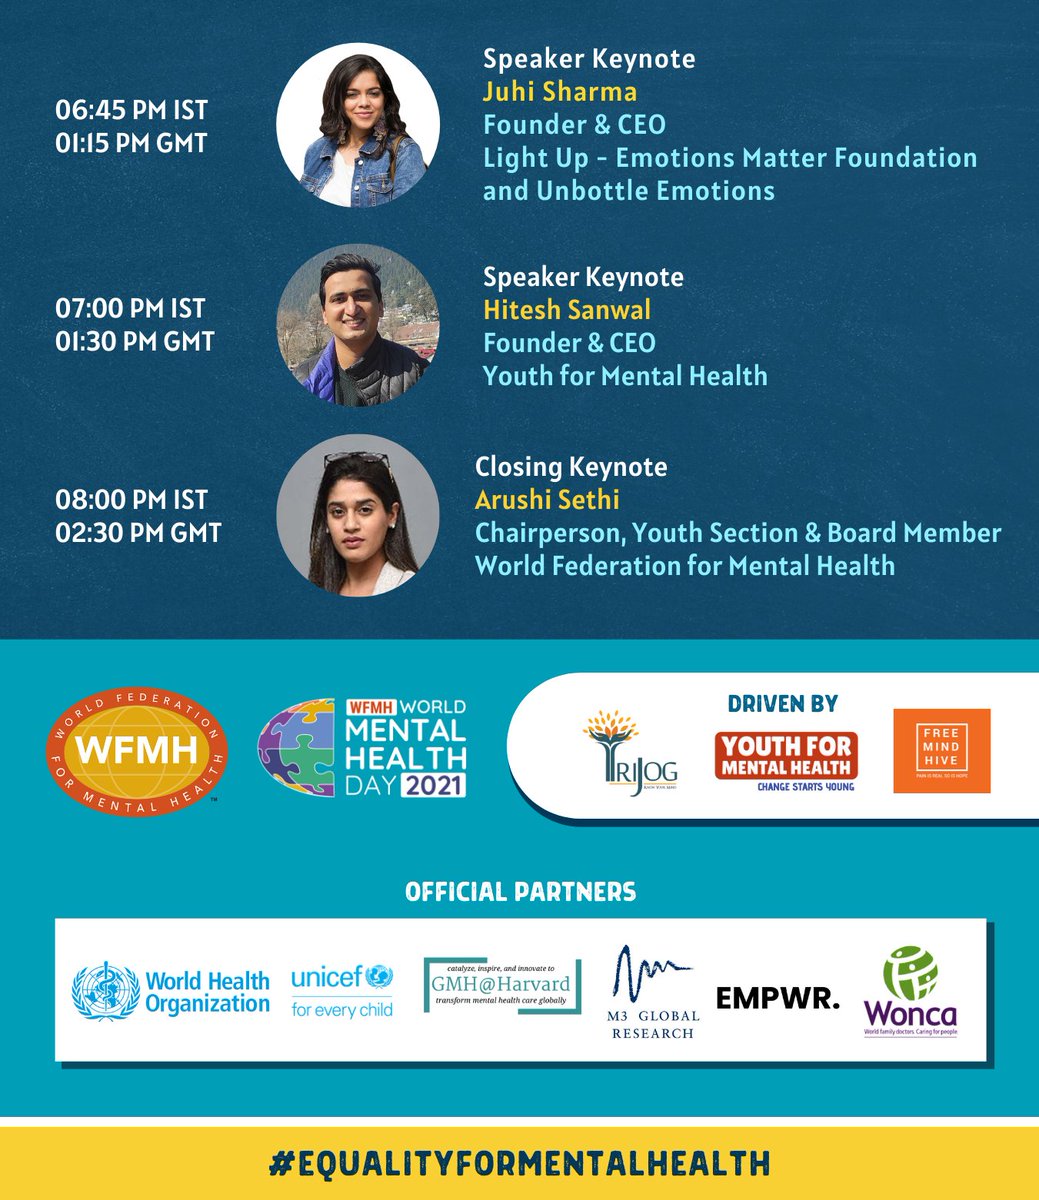 Our Global Youth Conclave'21 is now streaming on WHFMH Facebook as part of our Global Campaign 2021 recognizing World Mental Health Day Swipe to learn more about the Digital Messages, Presentations and Speaker Keynotes of October 10 Know more at wmhd2021.com #WMHD2021